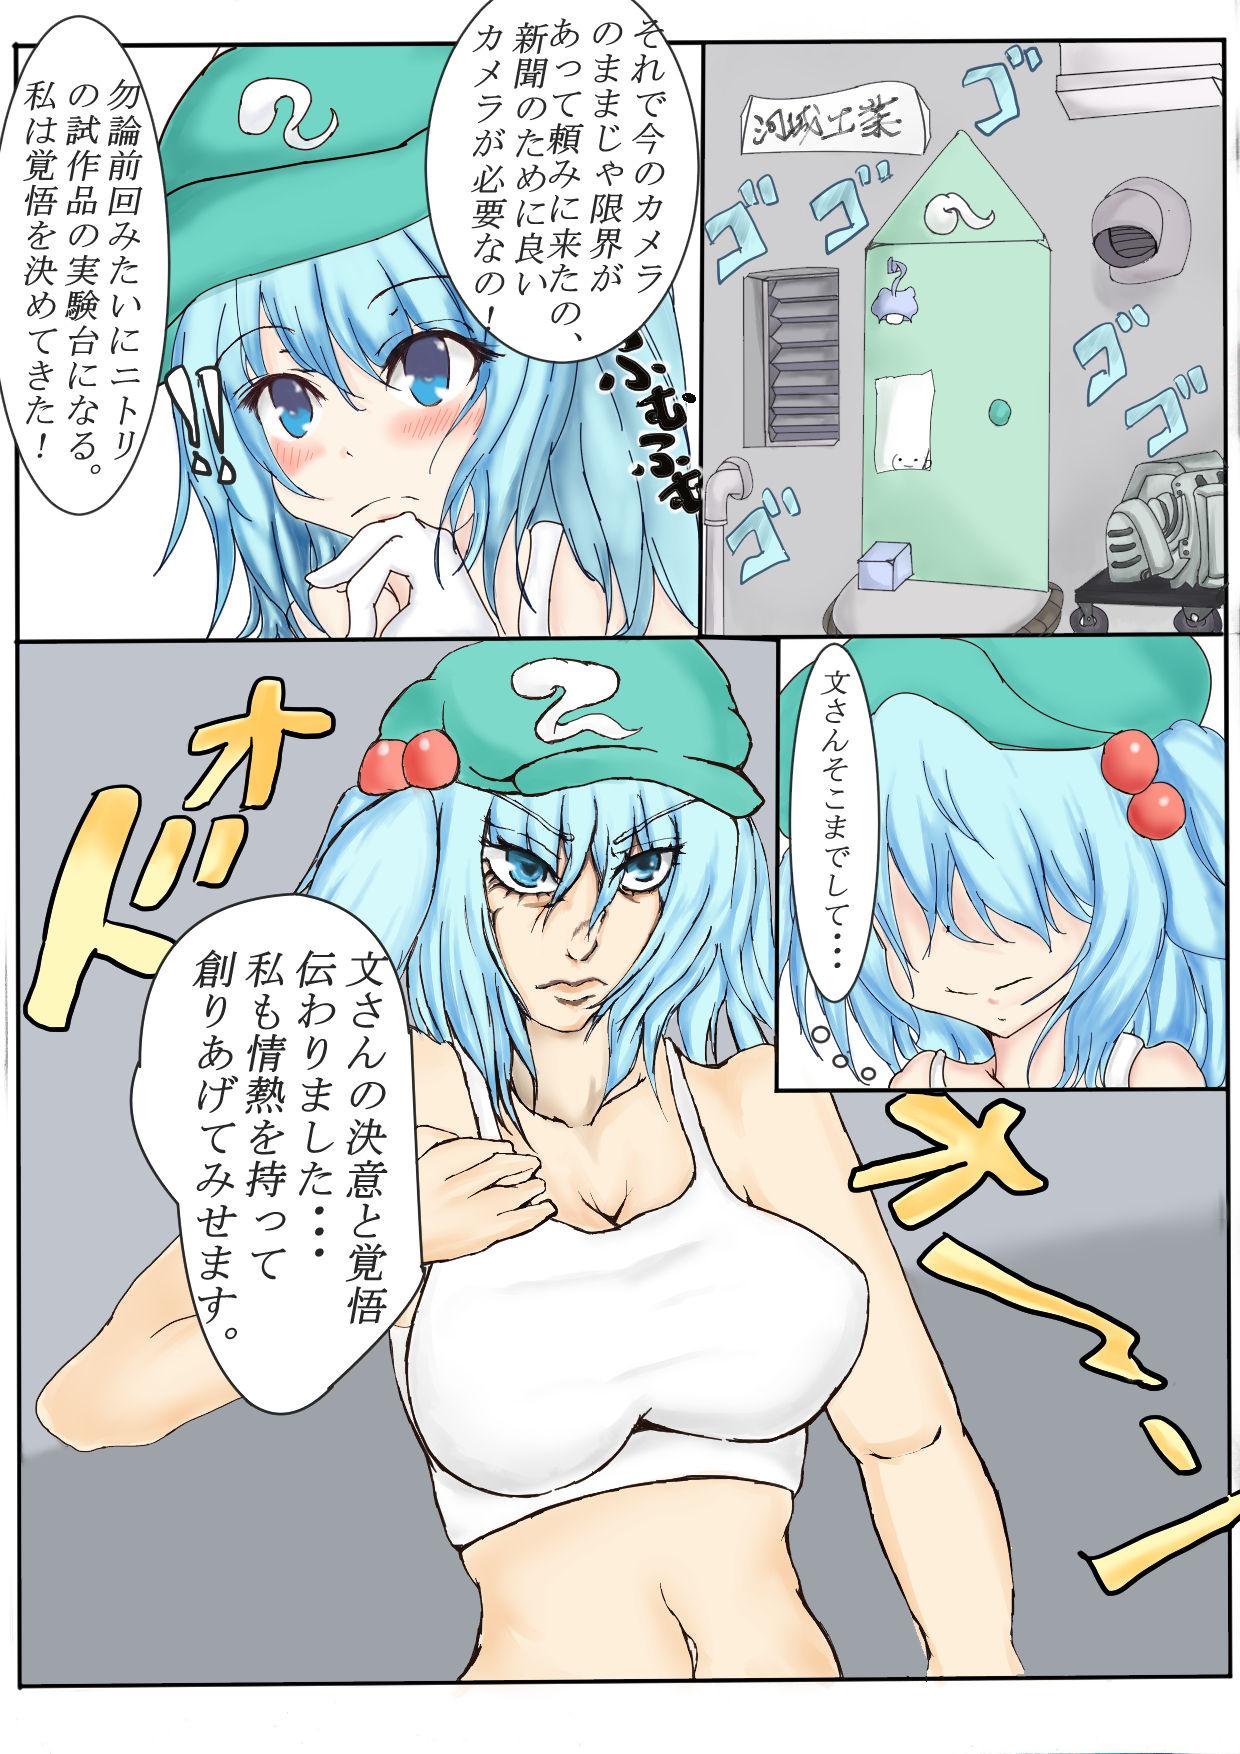 Lesbian Sex 射命丸文とかっぱのくすぐり互恵録 - Touhou project Online - Page 3